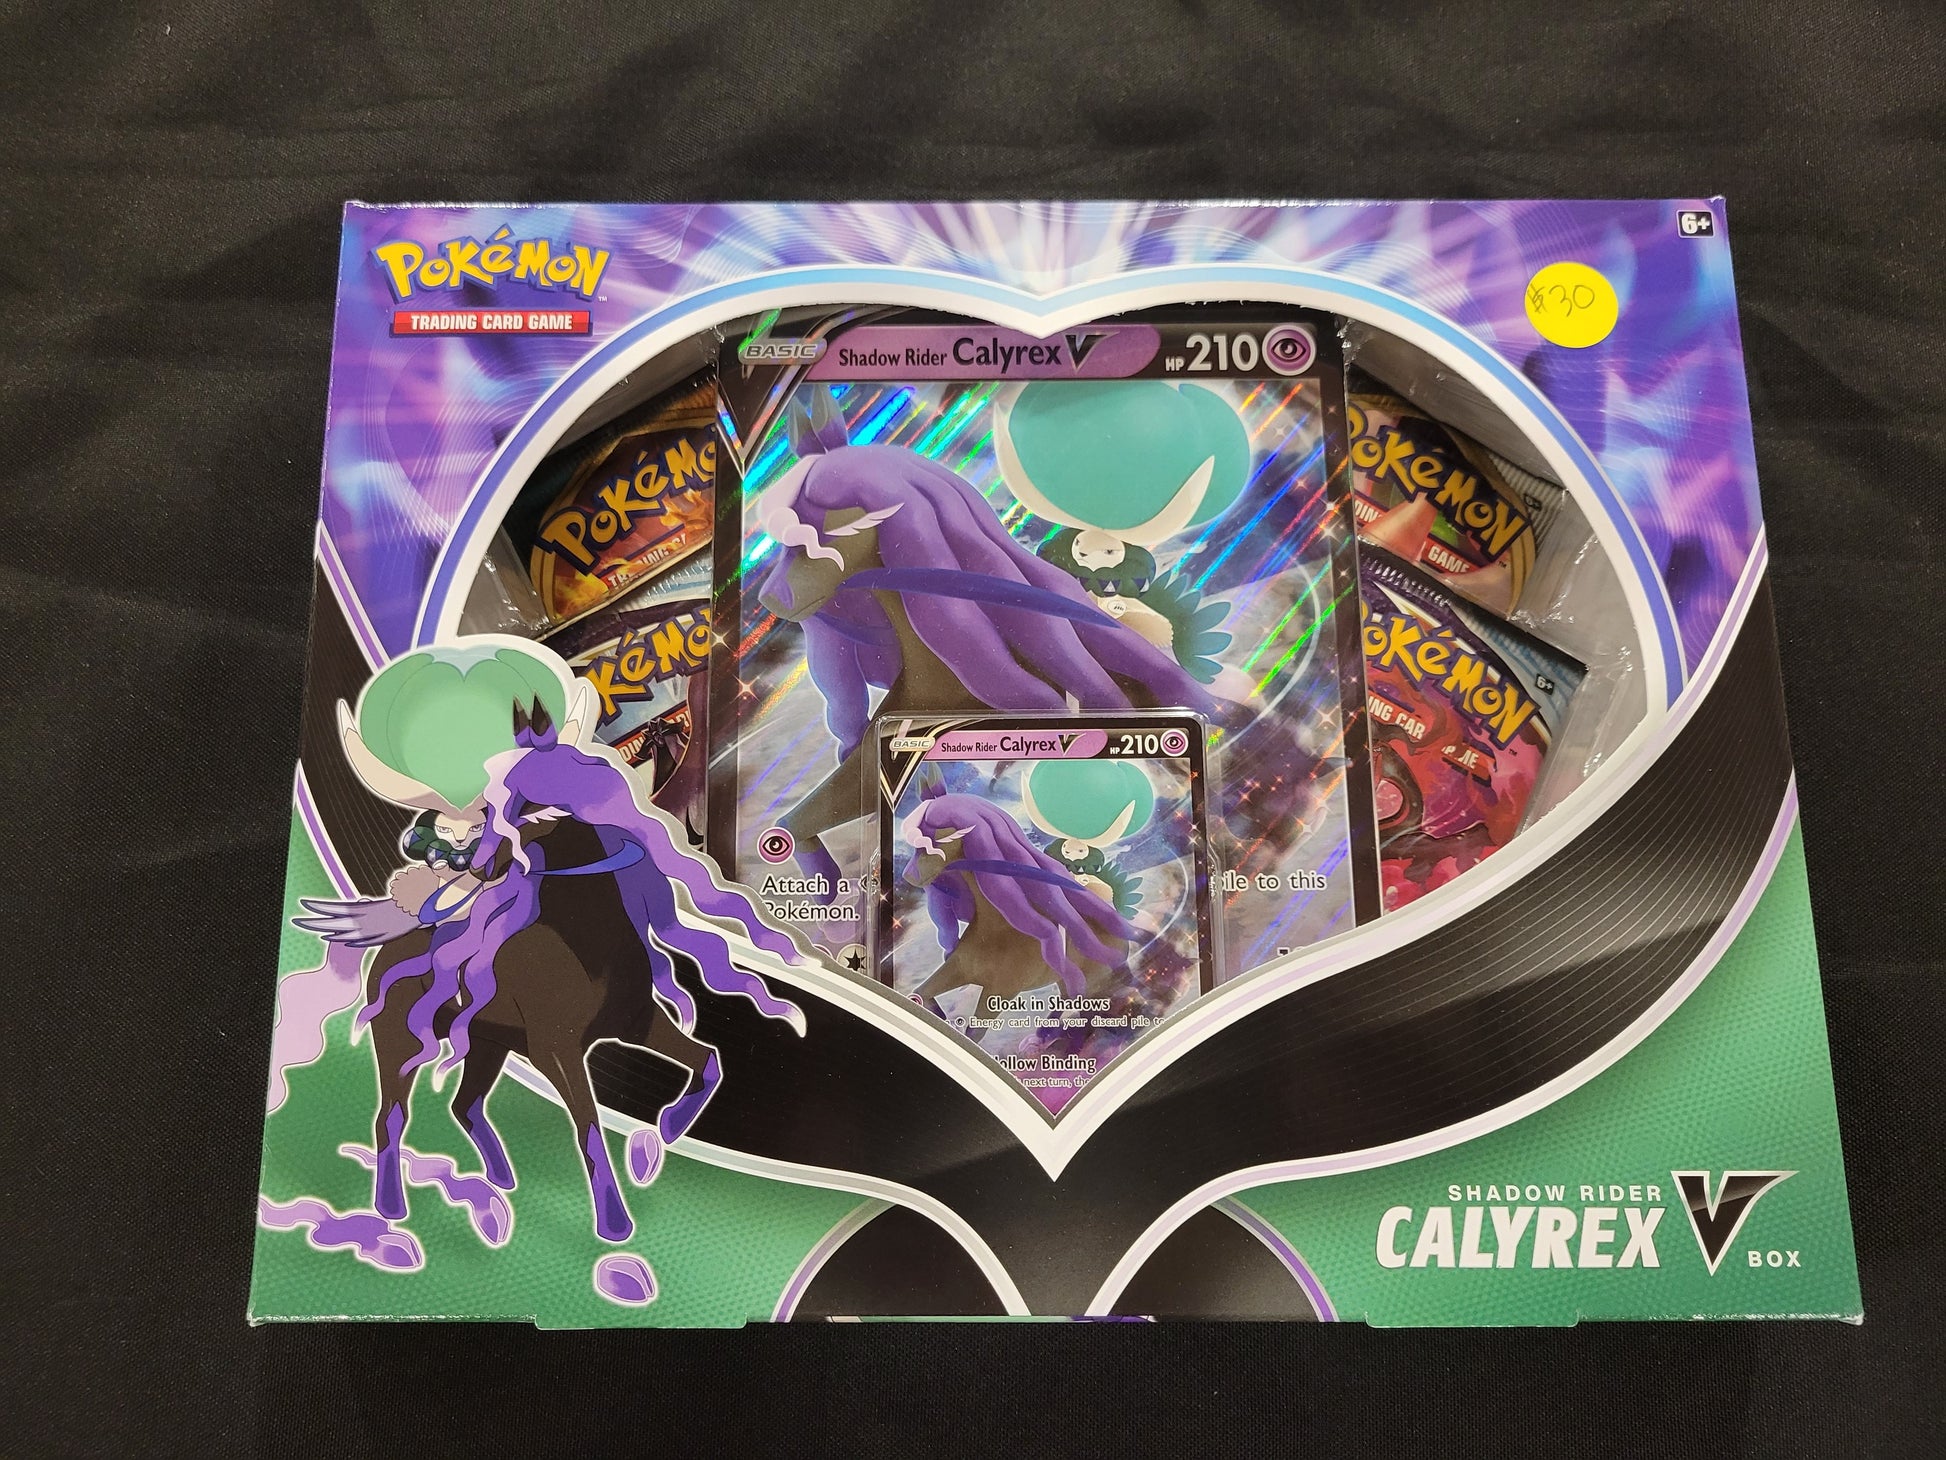 Each Calyrex V box comes with one oversized Calyrex V card, one holofoil Calyrex card, one online code card and four tcg packs.